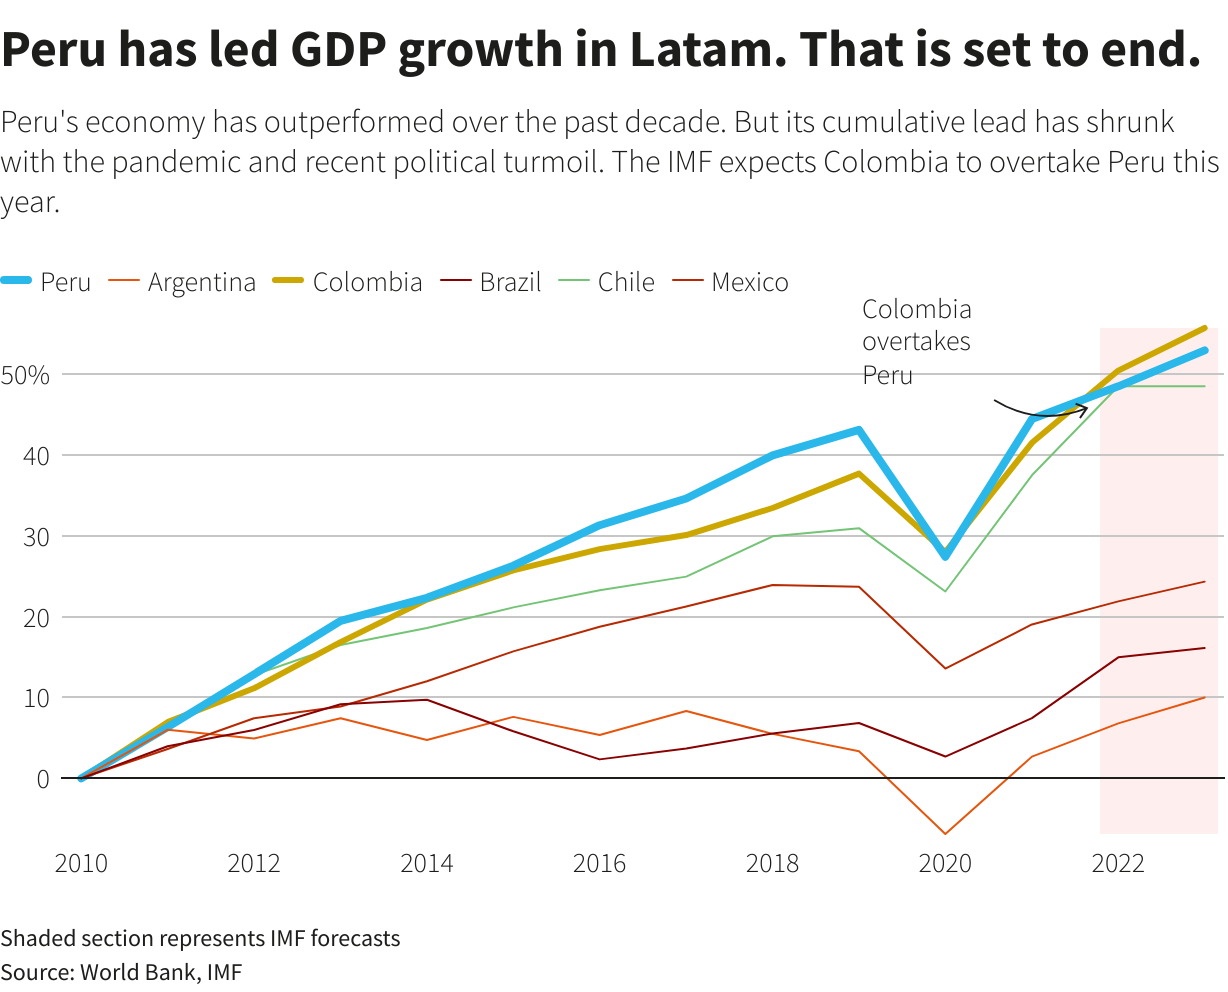 Peru has led GDP growth in Latam. That is set to end